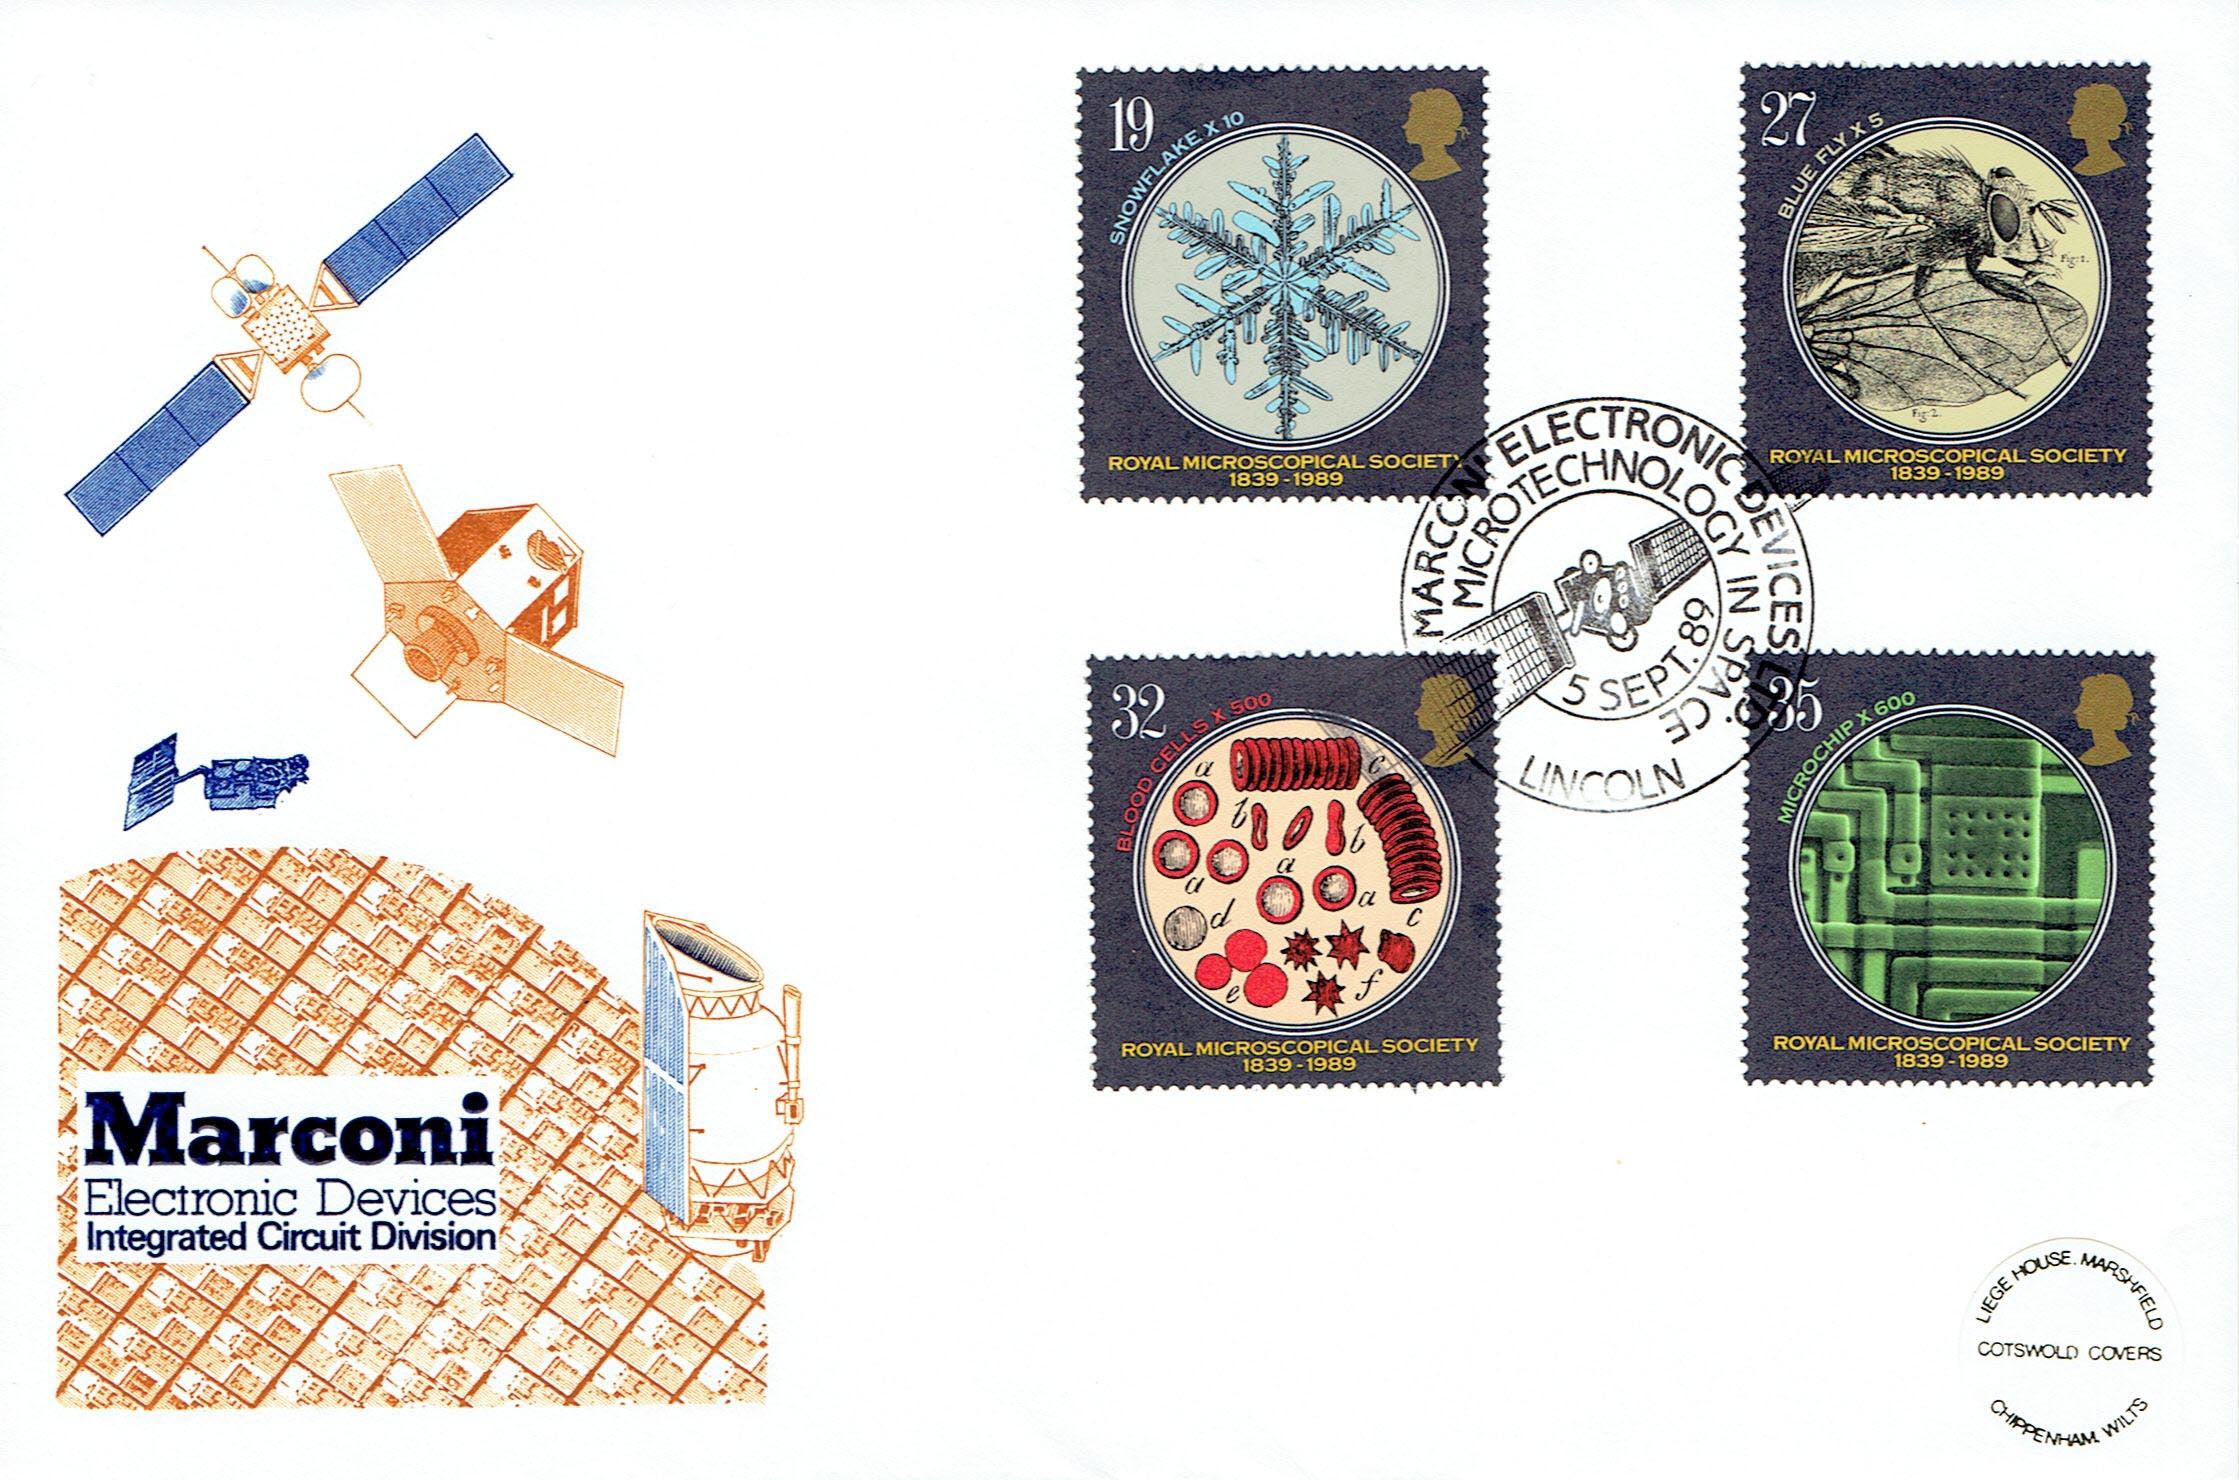 Marconi Microtechnology Stamps (first-day cover)